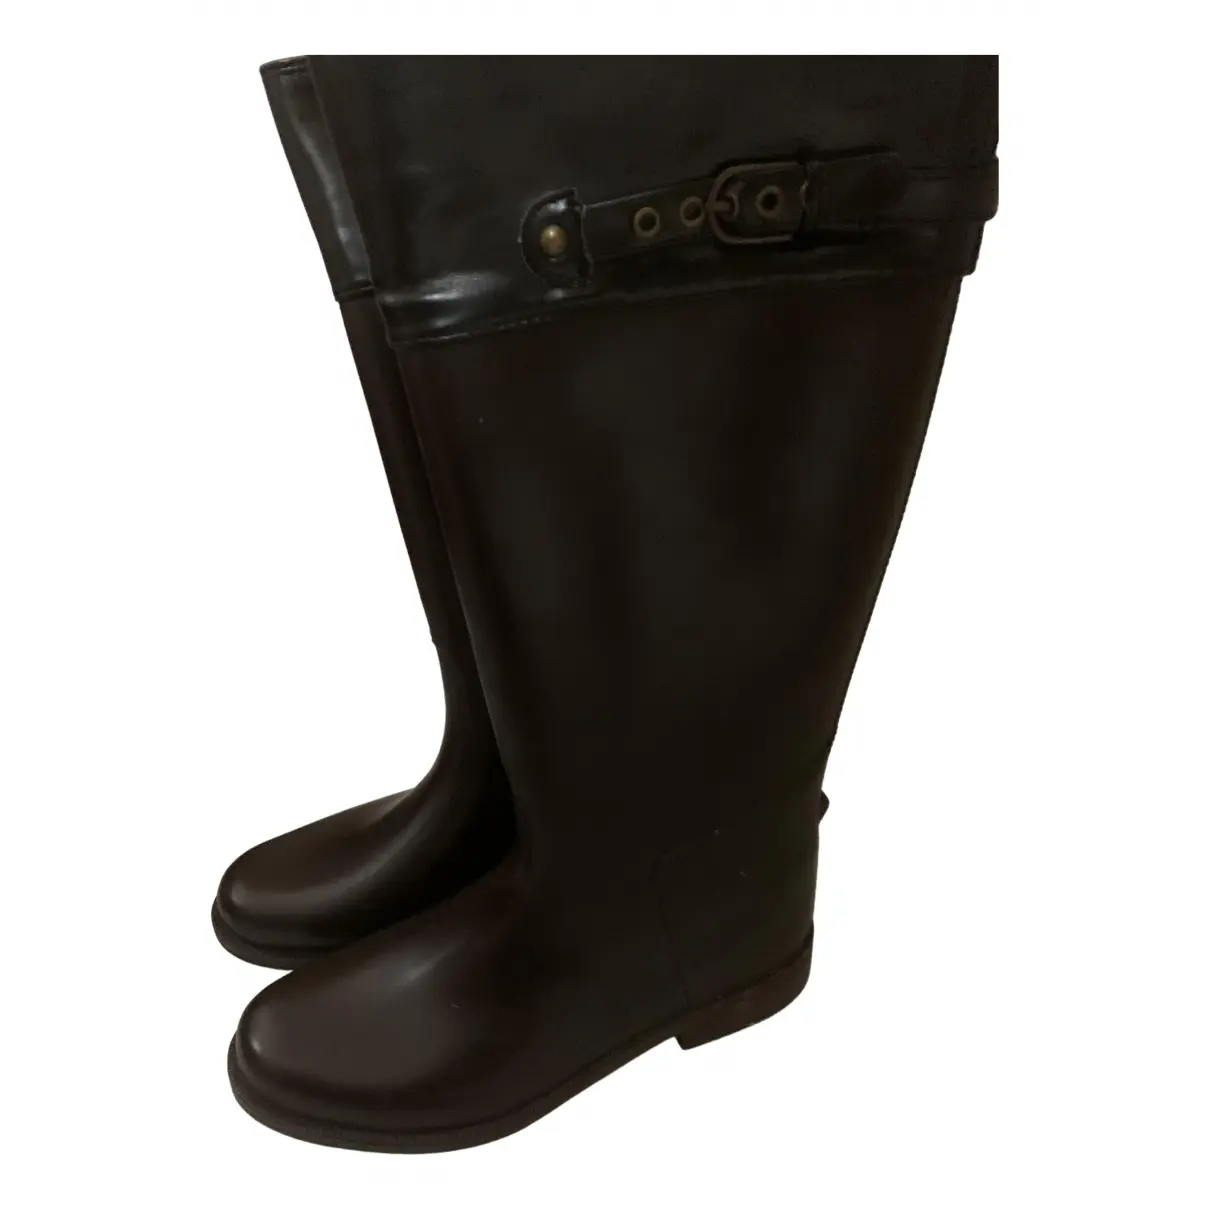 Riding boots CORTEFIEL